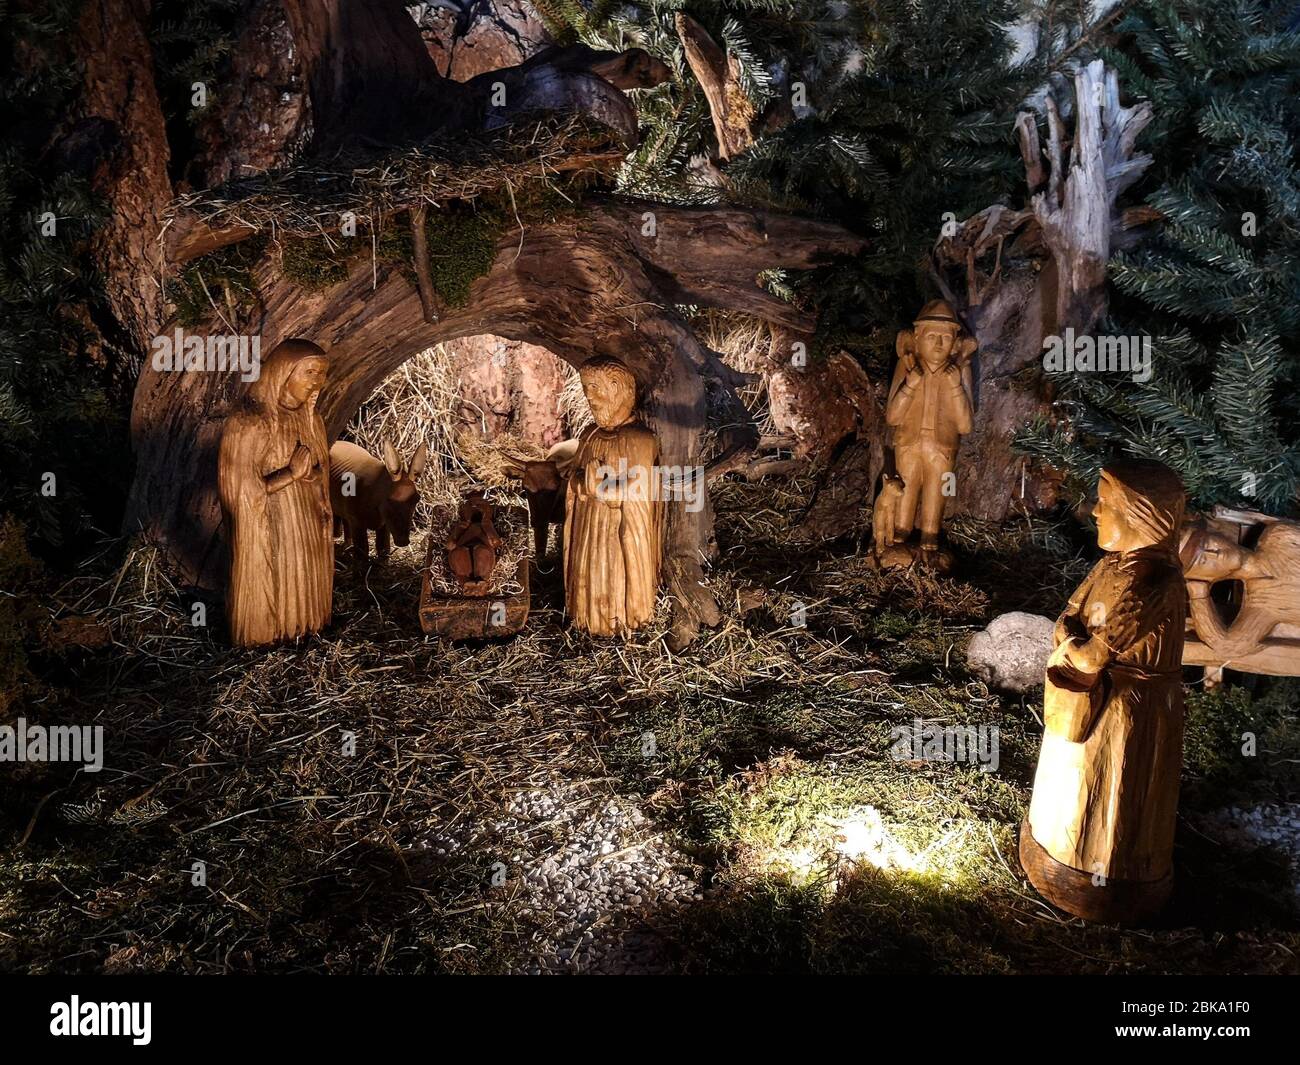 Ossana, Italy - December 26, 2019: Nativity scene made with hand-carved wooden figurines. Stock Photo